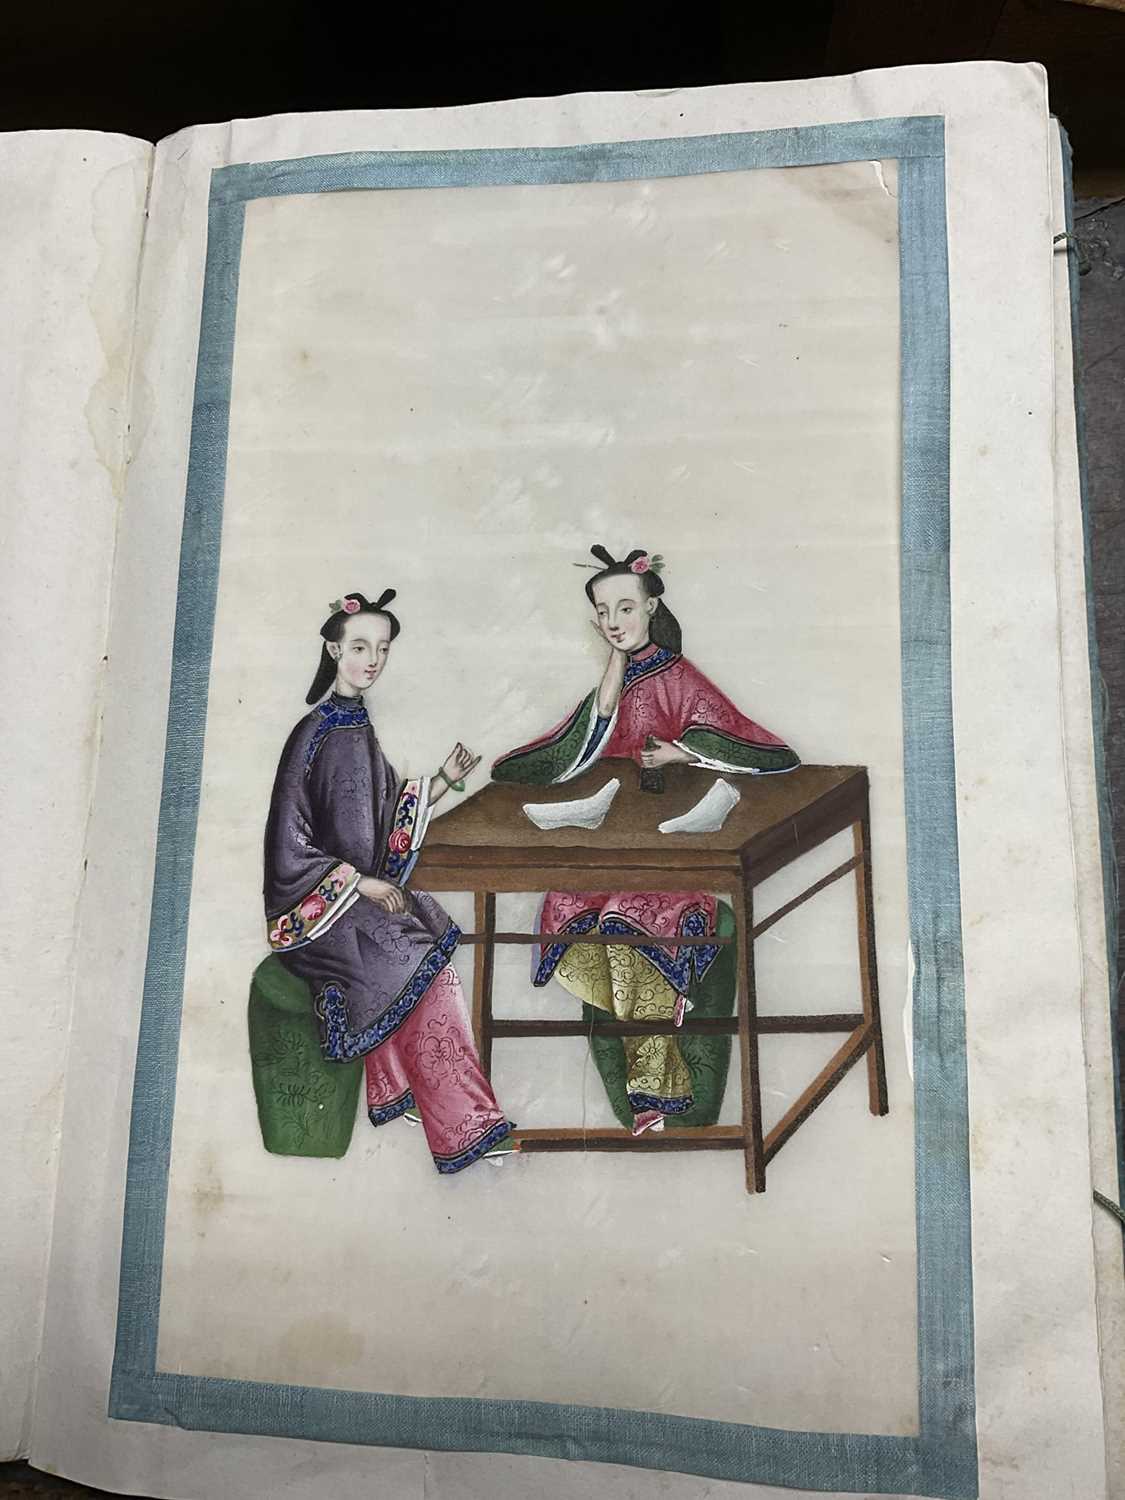 Album of antique Chinese rice paper paintings showing the production of silk - Image 4 of 27